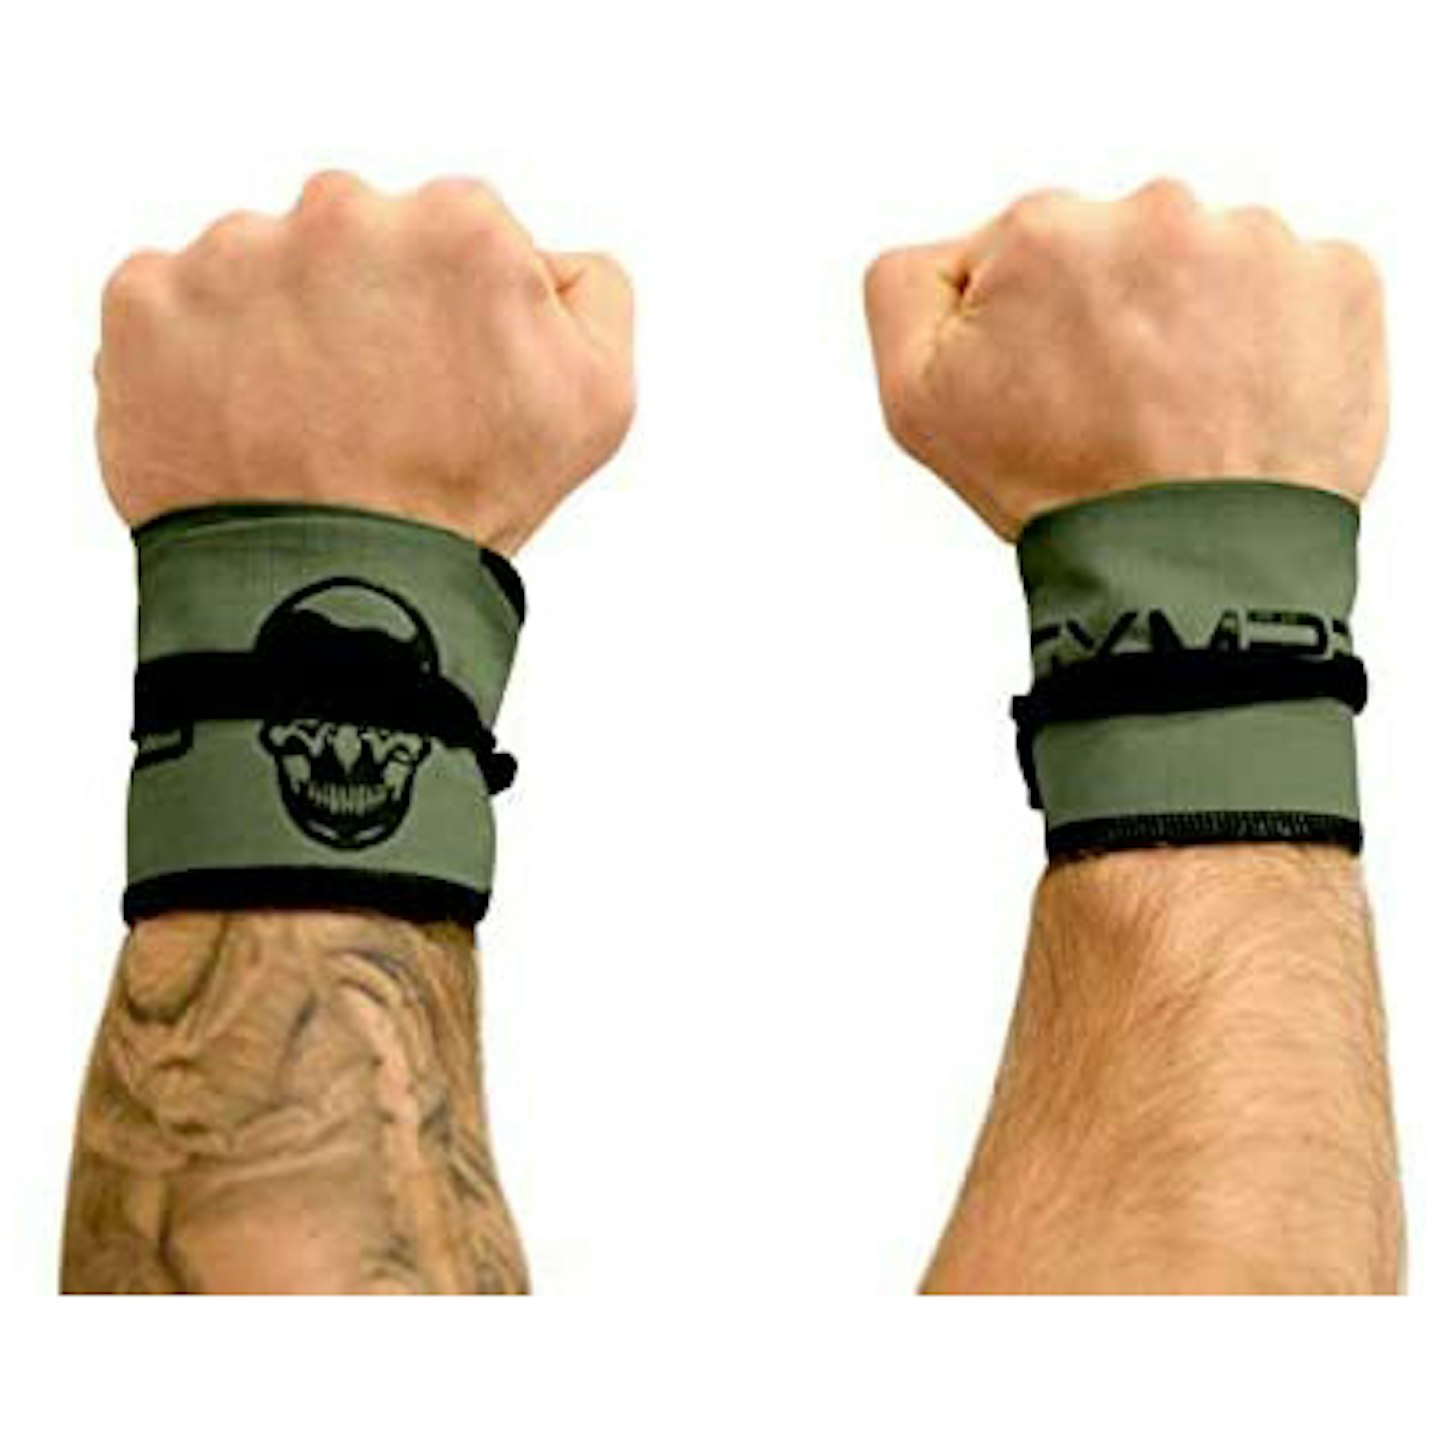 gymreapers, Accessories, Gymreapers Lifting Straps